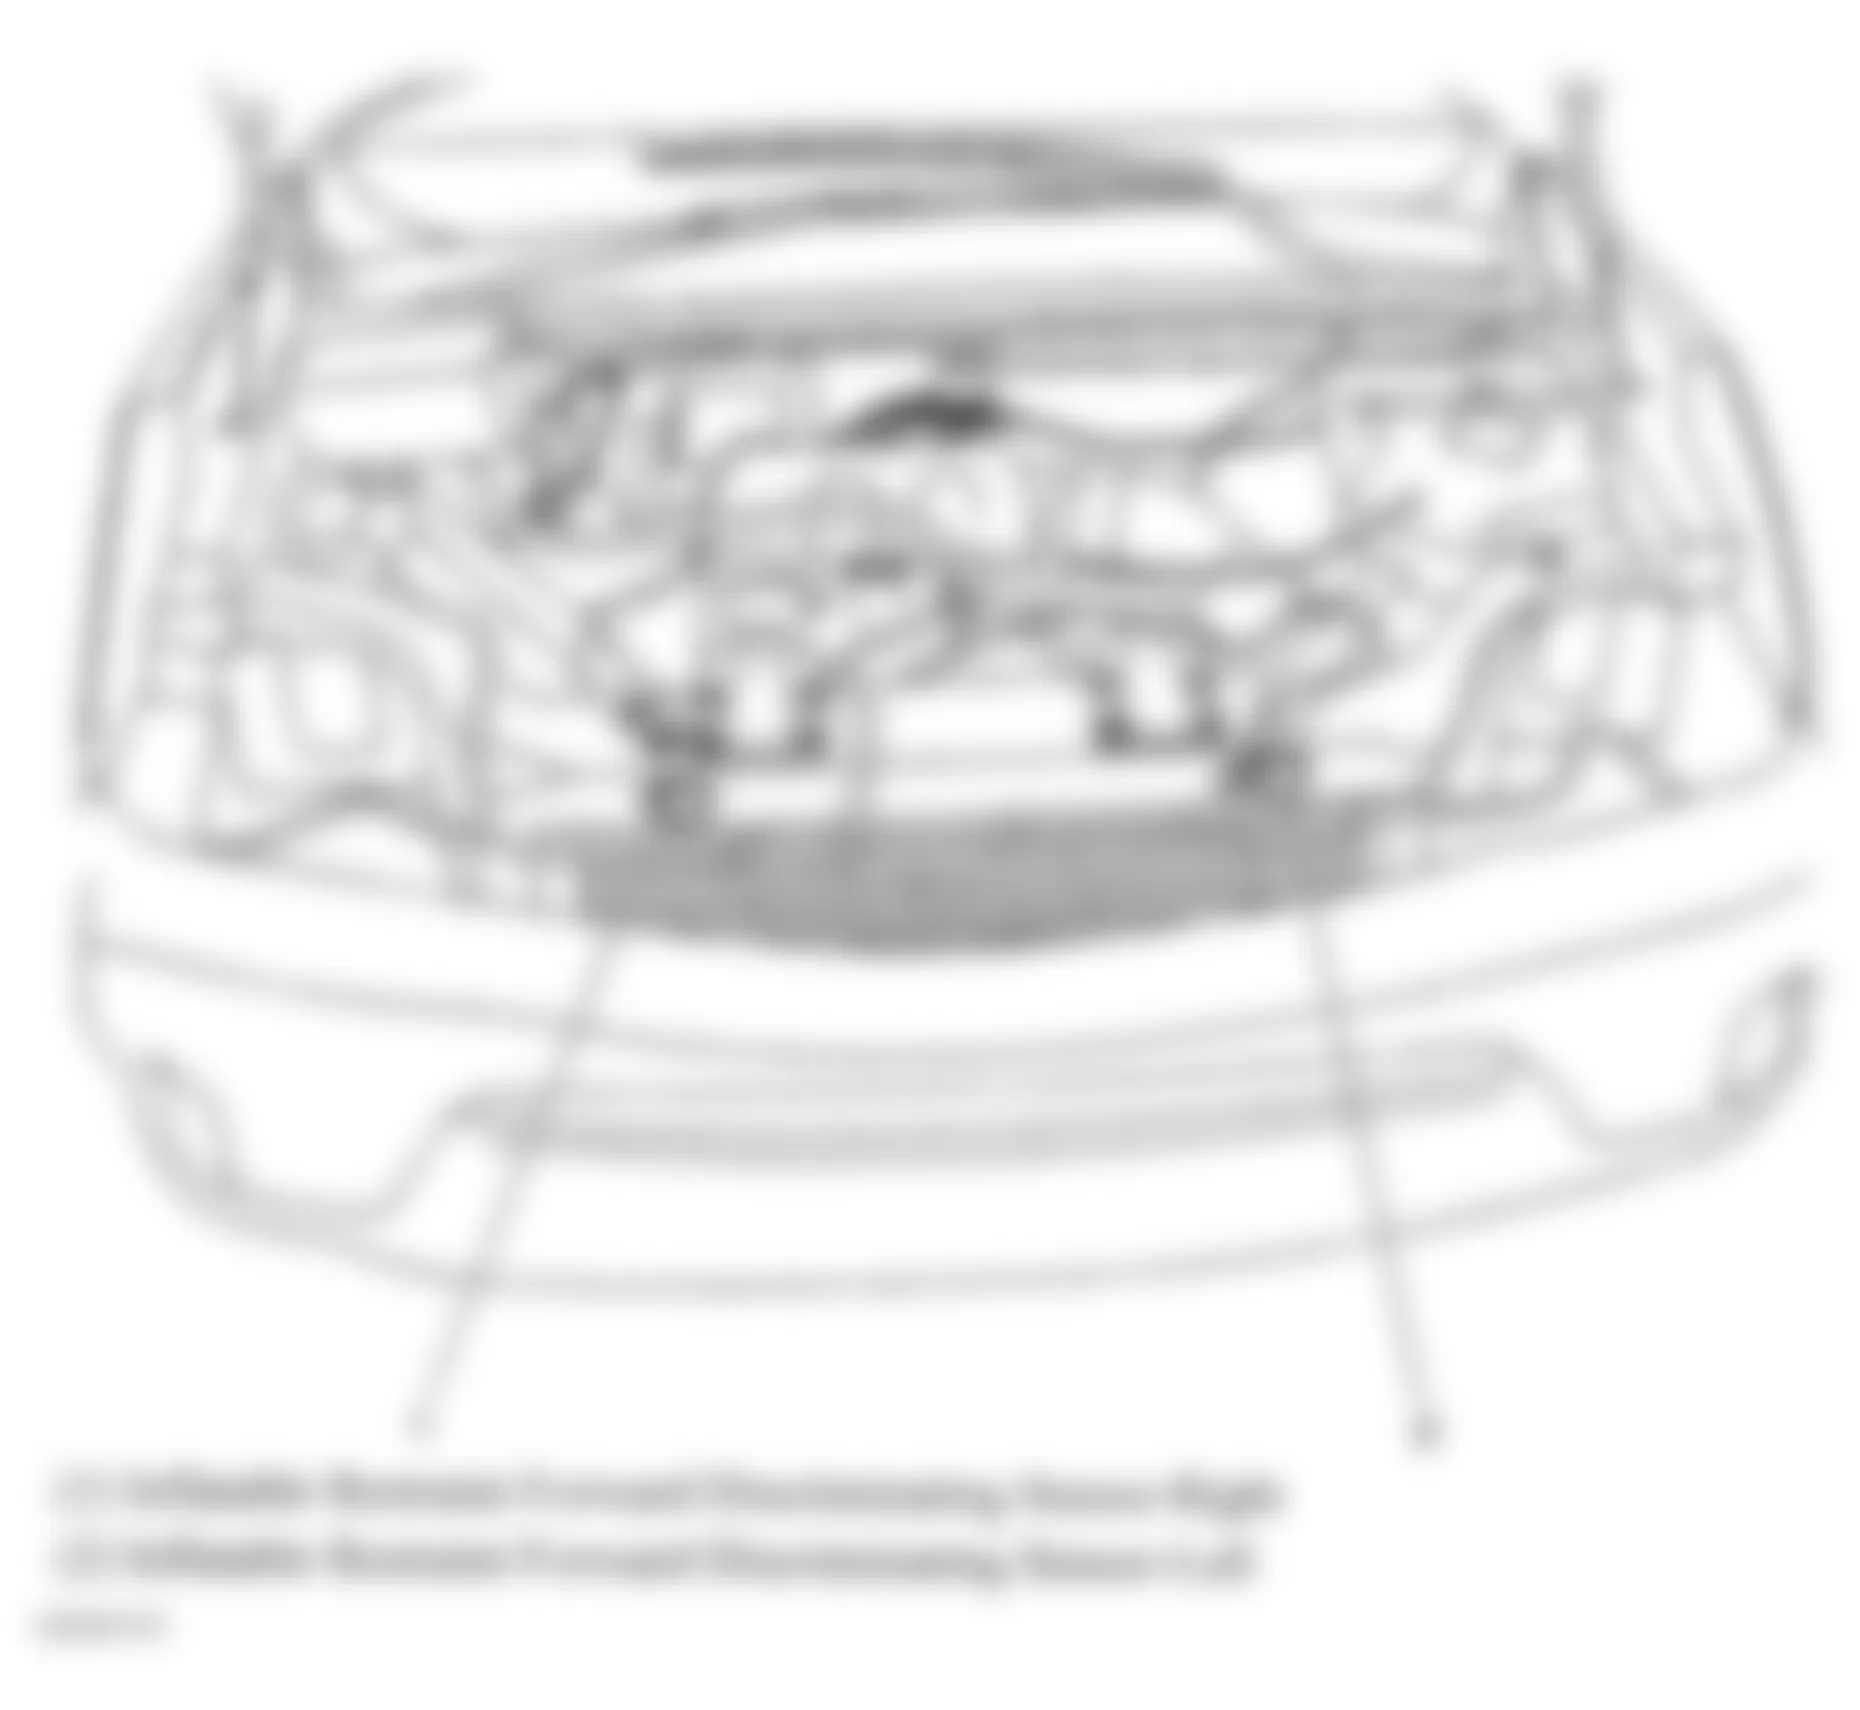 Buick Rendezvous CXL 2005 - Component Locations -  Front Of Engine Compartment